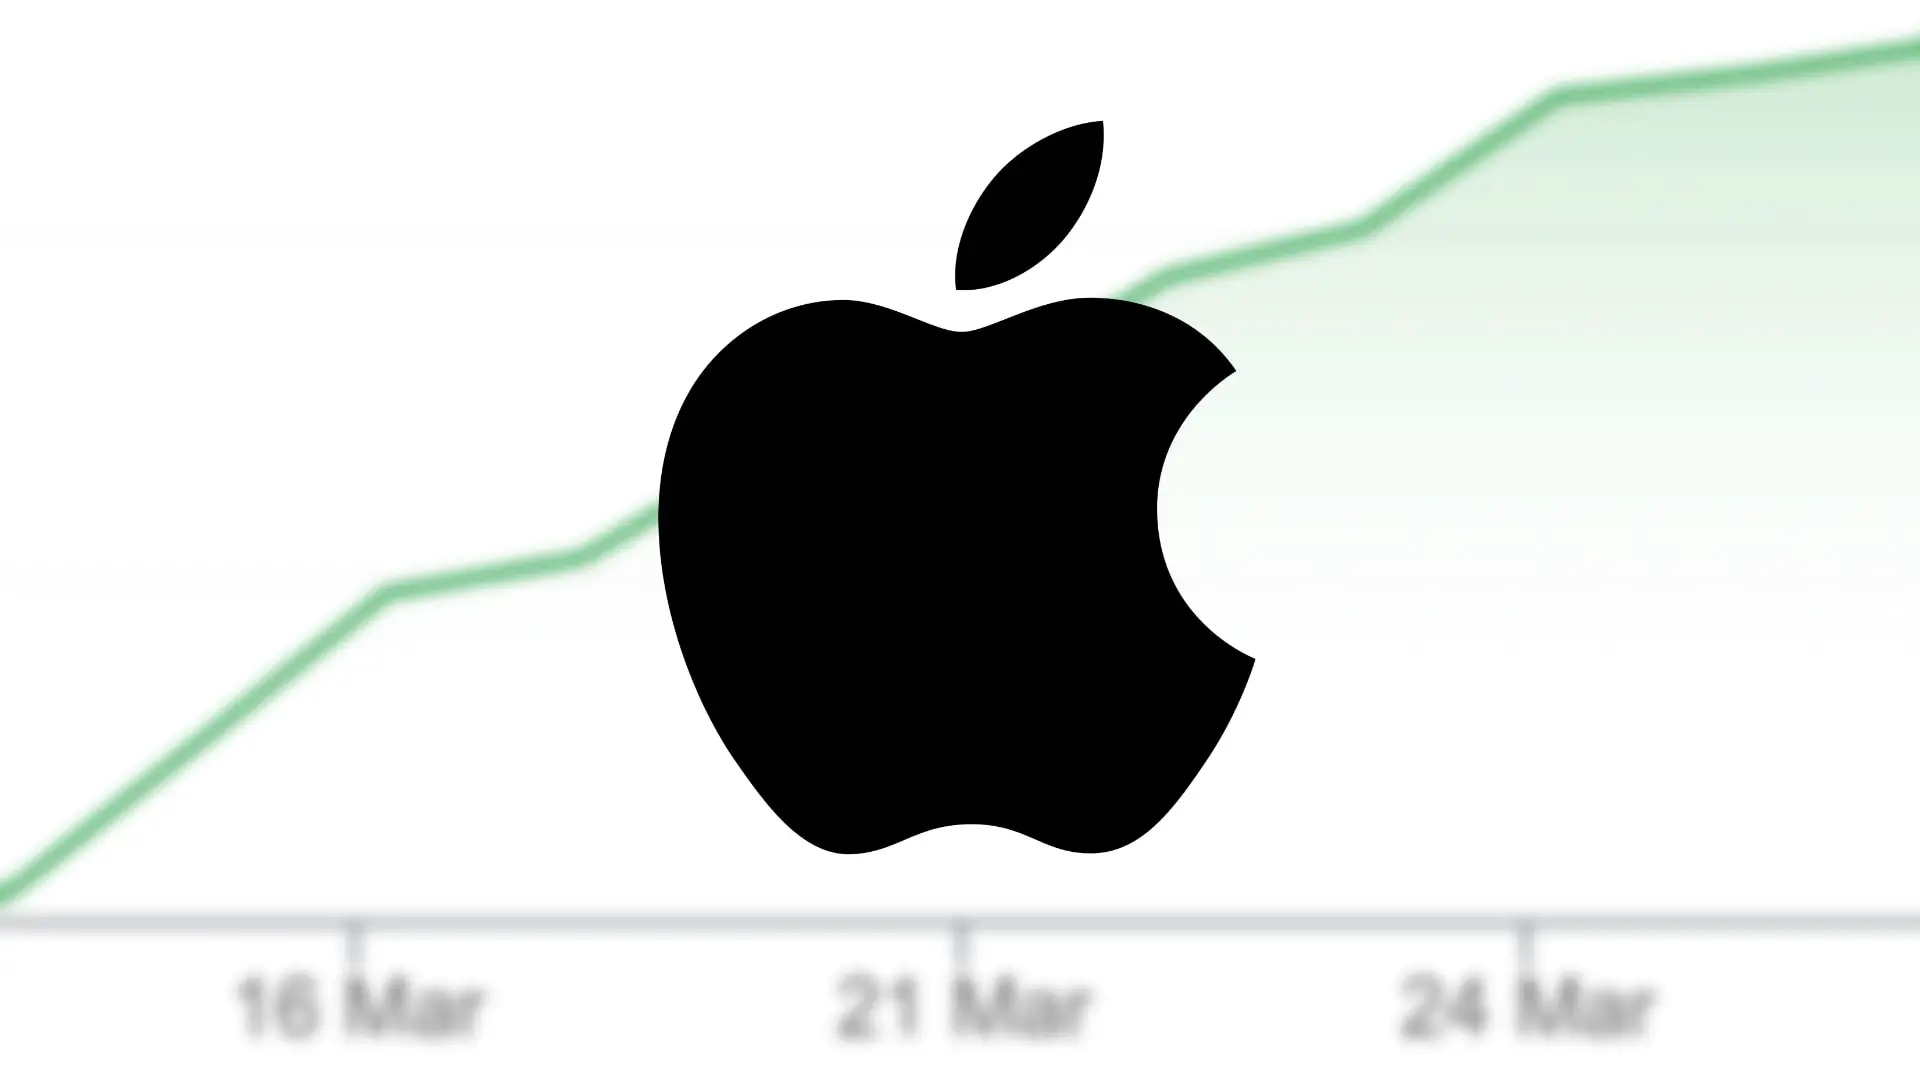 Apple Becomes First Stock To Close With $3 Billion Market Cap After NASDAQ Rally